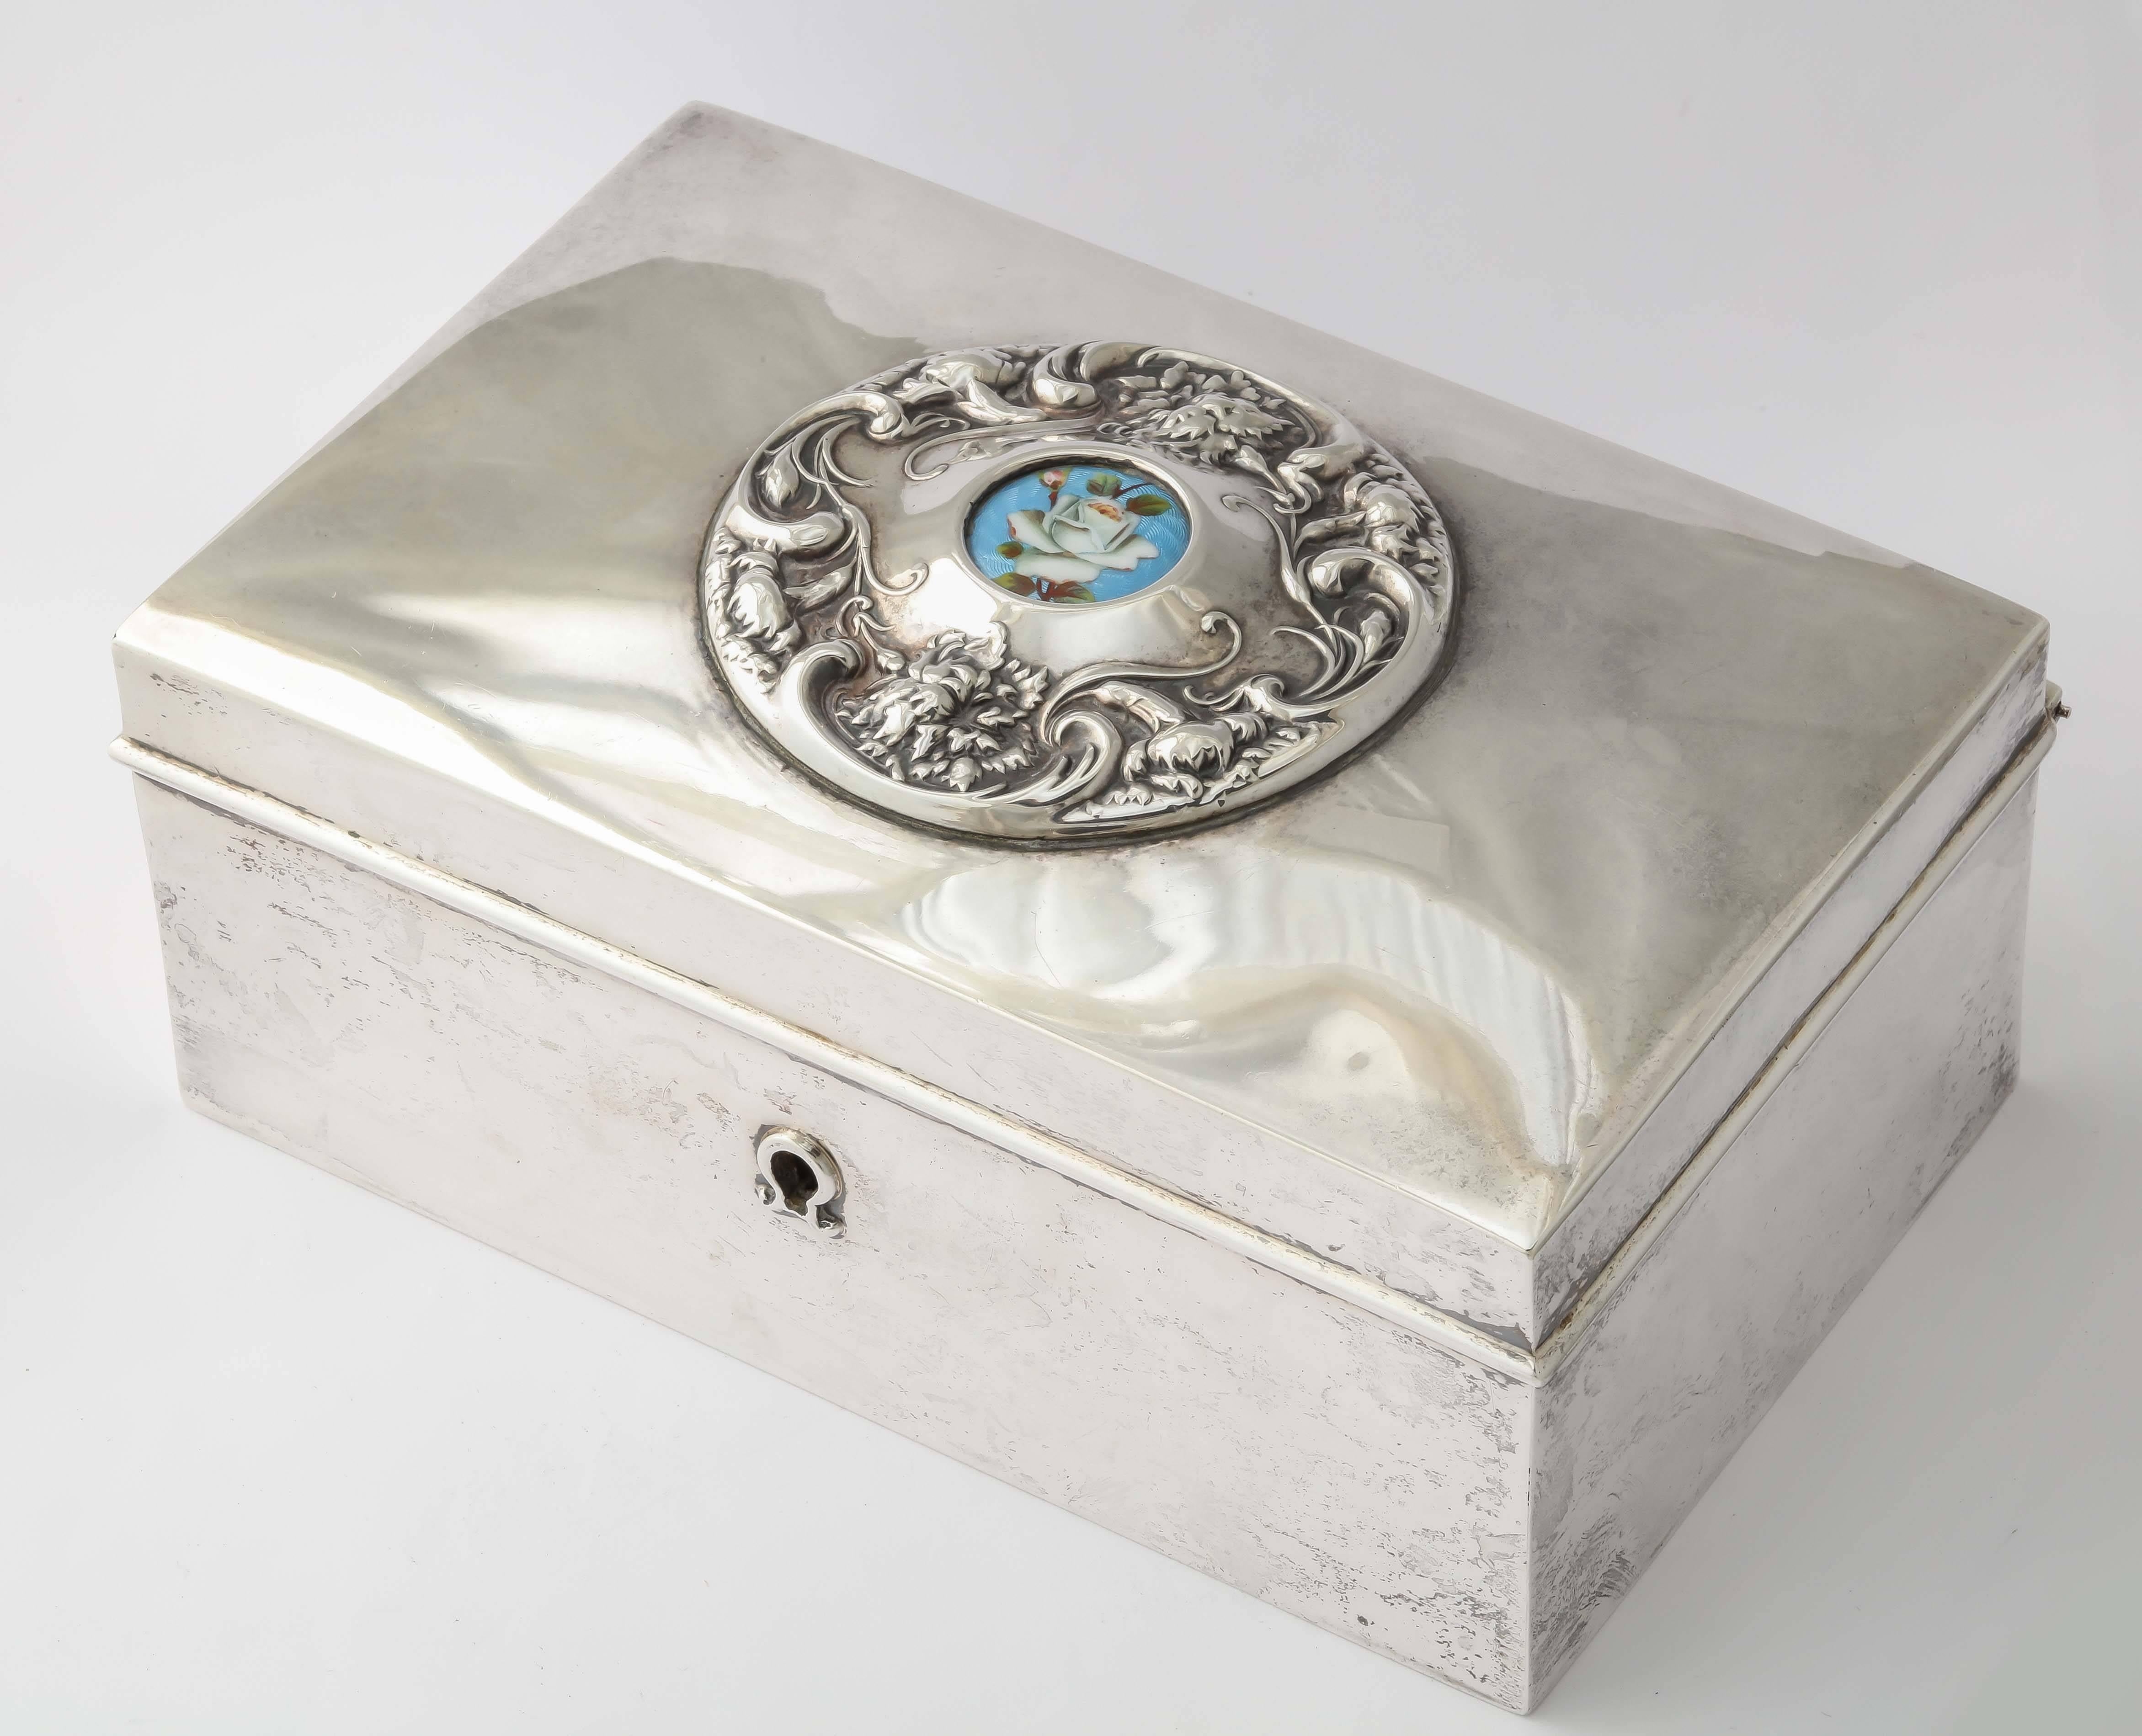 19th Century American Silver Love Letter Box by Meriden-Brittania For Sale 2